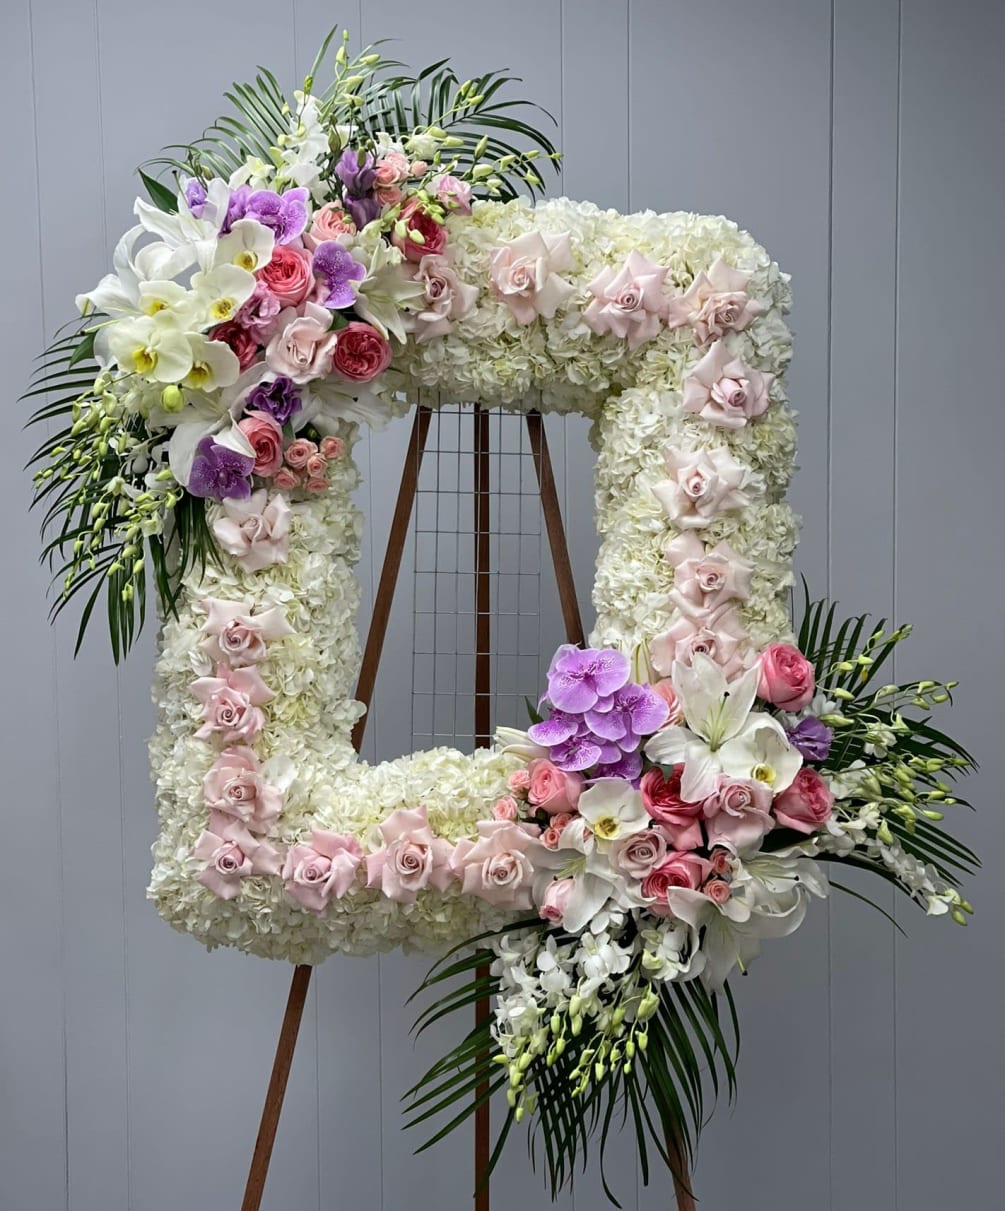 This luxurious frame spray is designed by Kenneth Village Flowers as an